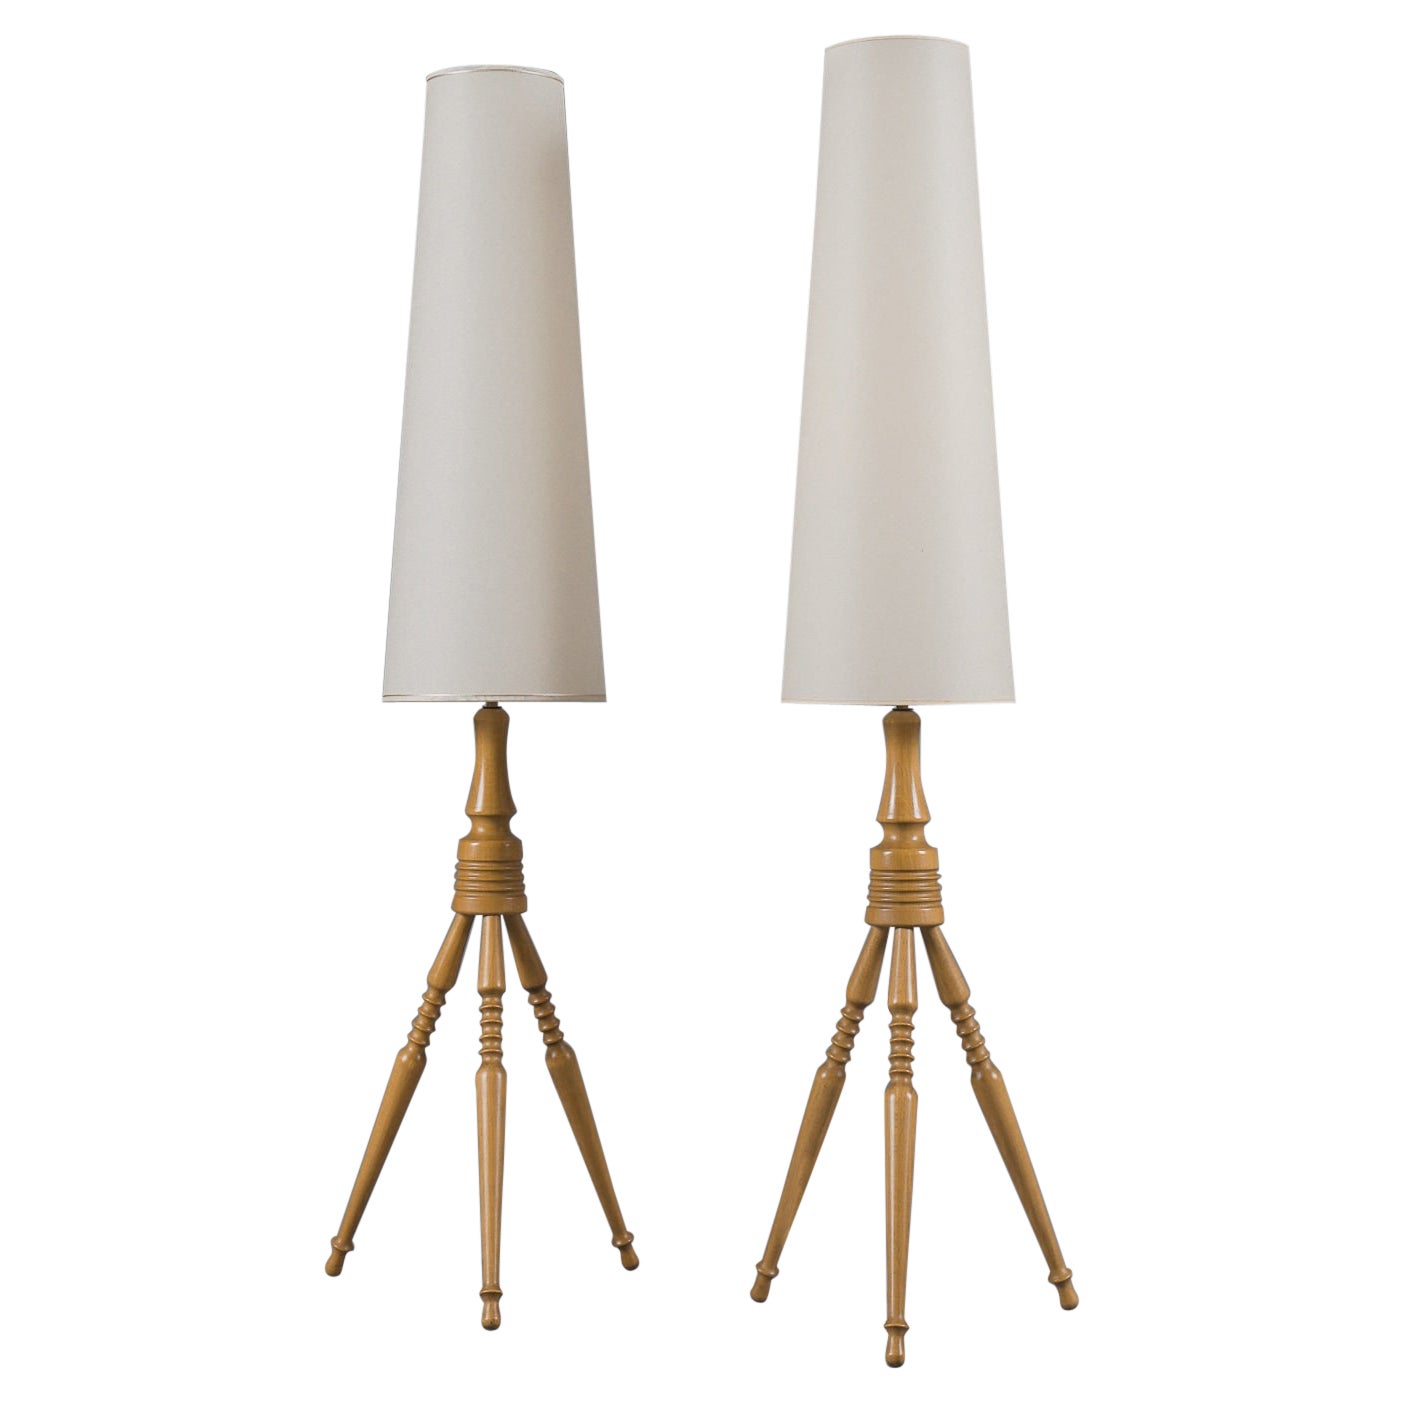 Lovely Pair Mid-Century Modern Floor Lamps in Wood, 1960s, France For Sale